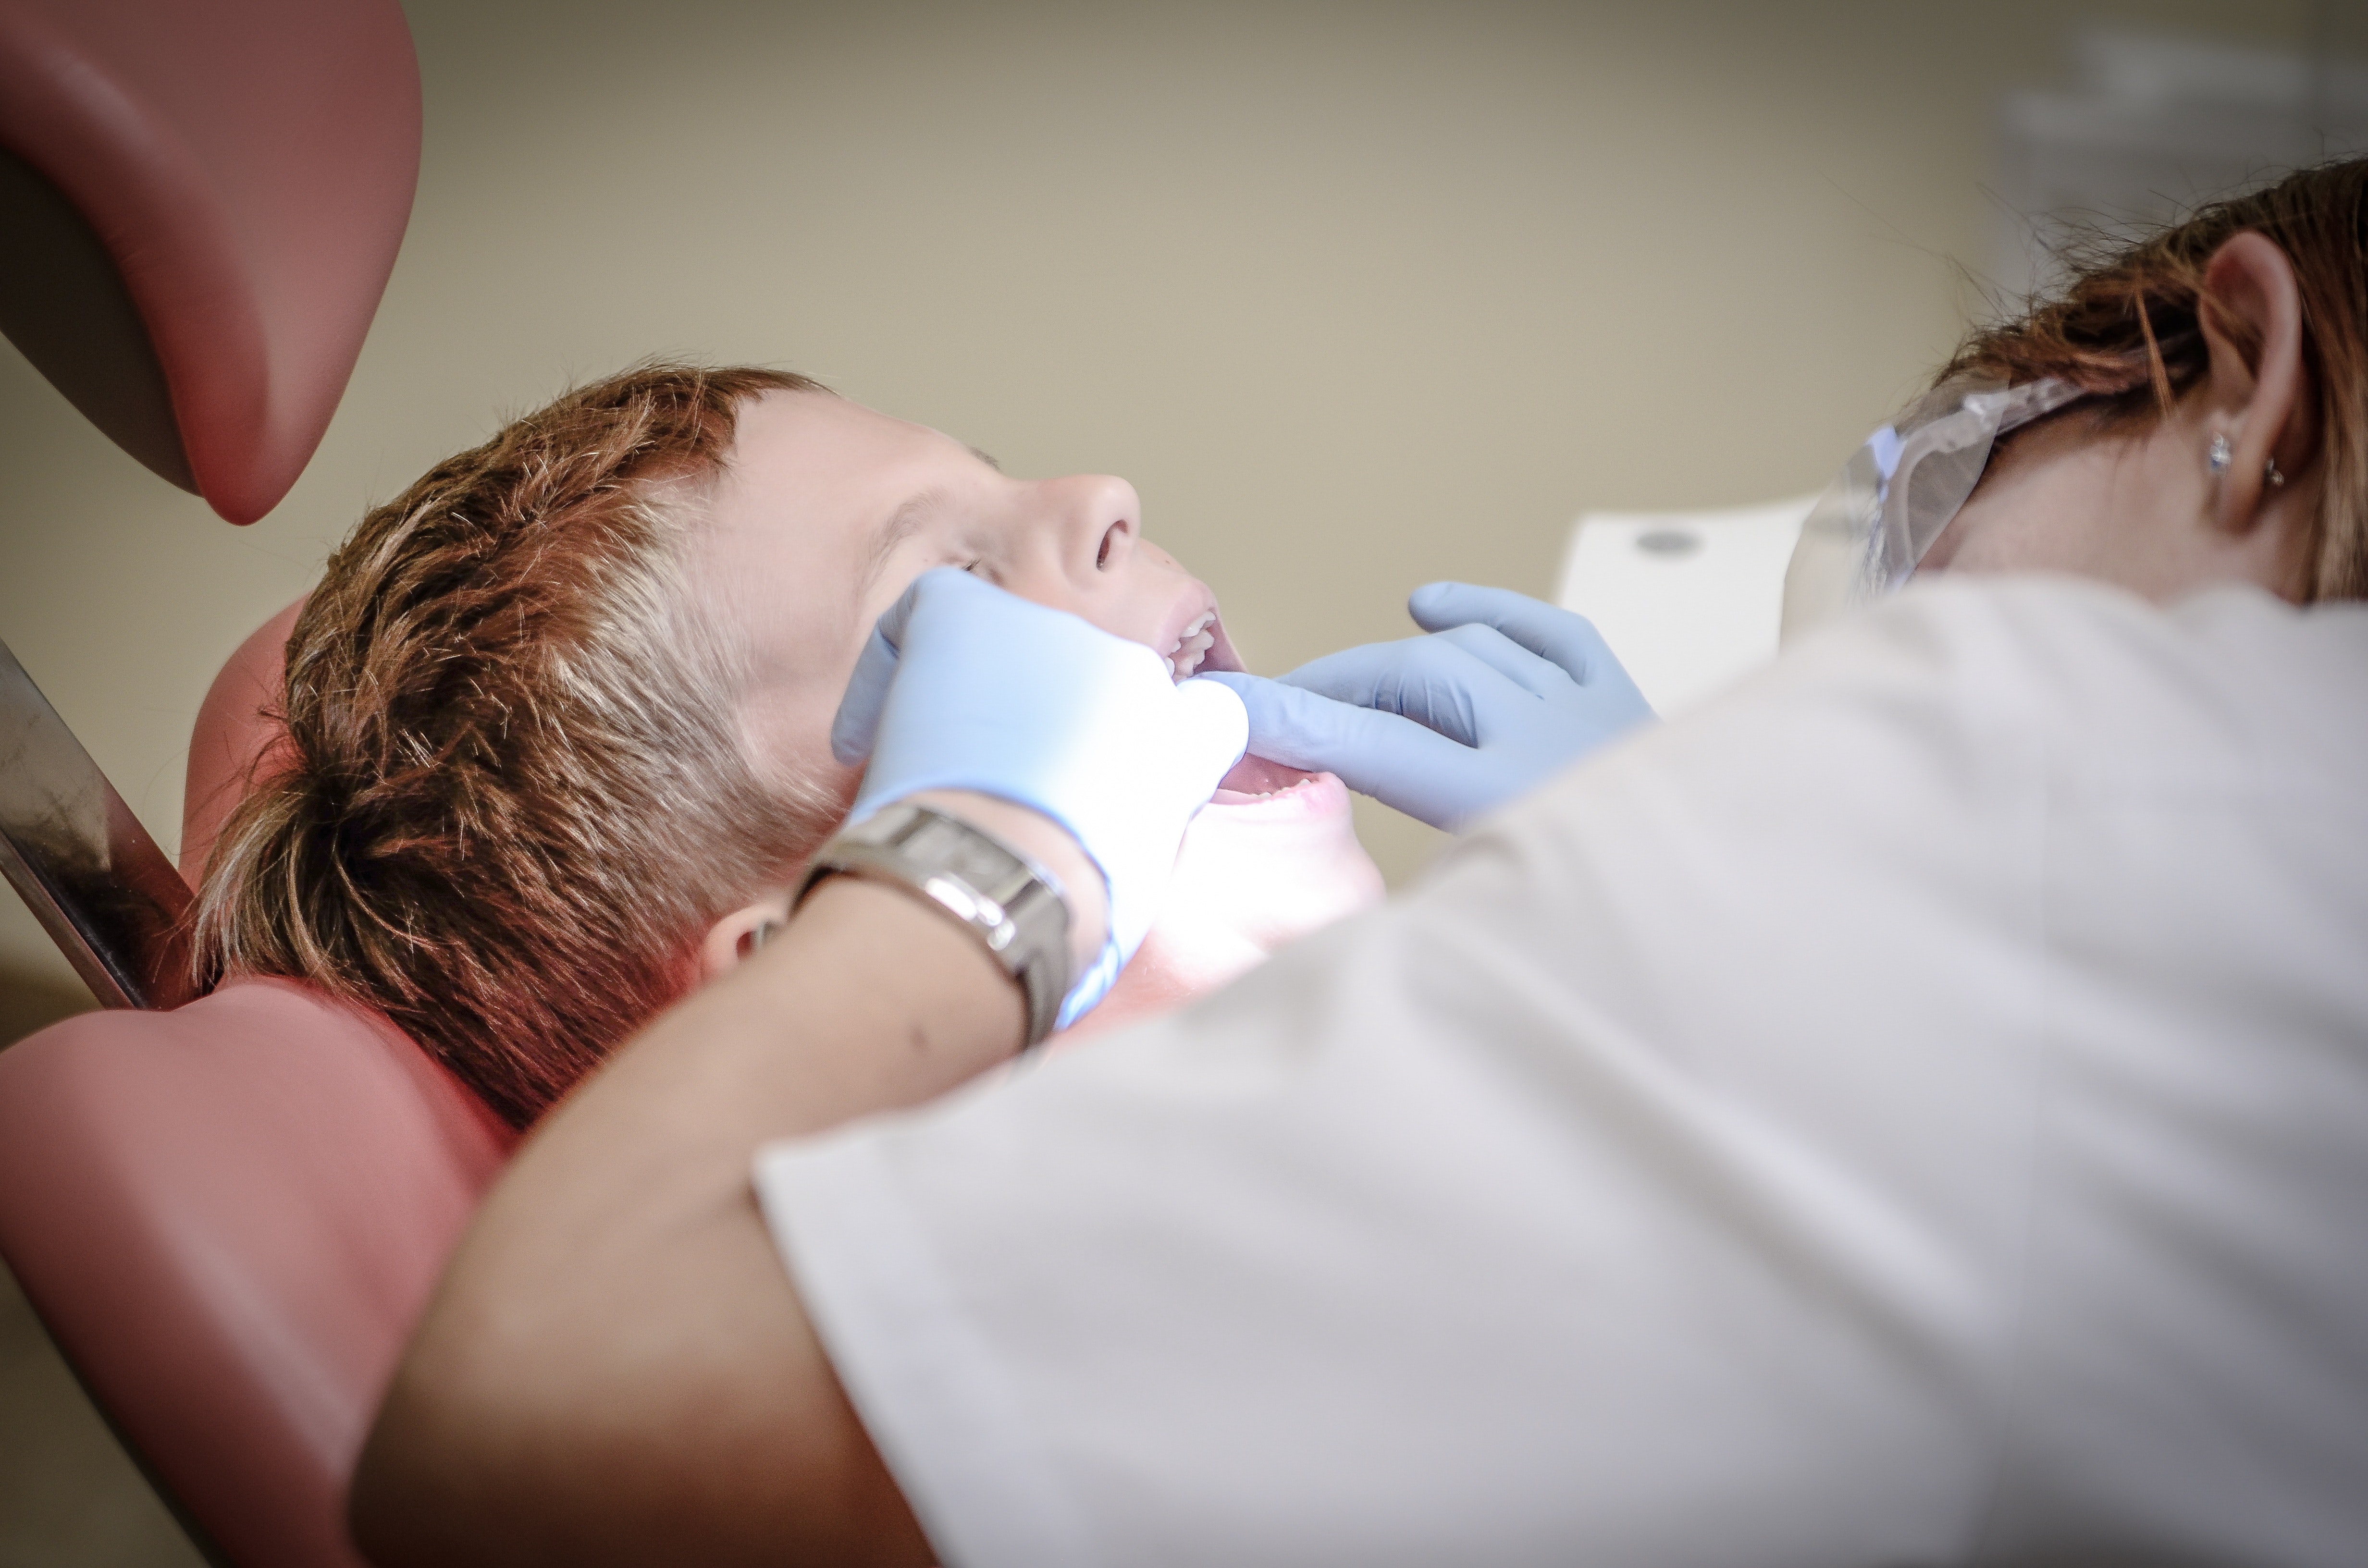 At What Age Should My Children Not go to a Paediatric Dentist?